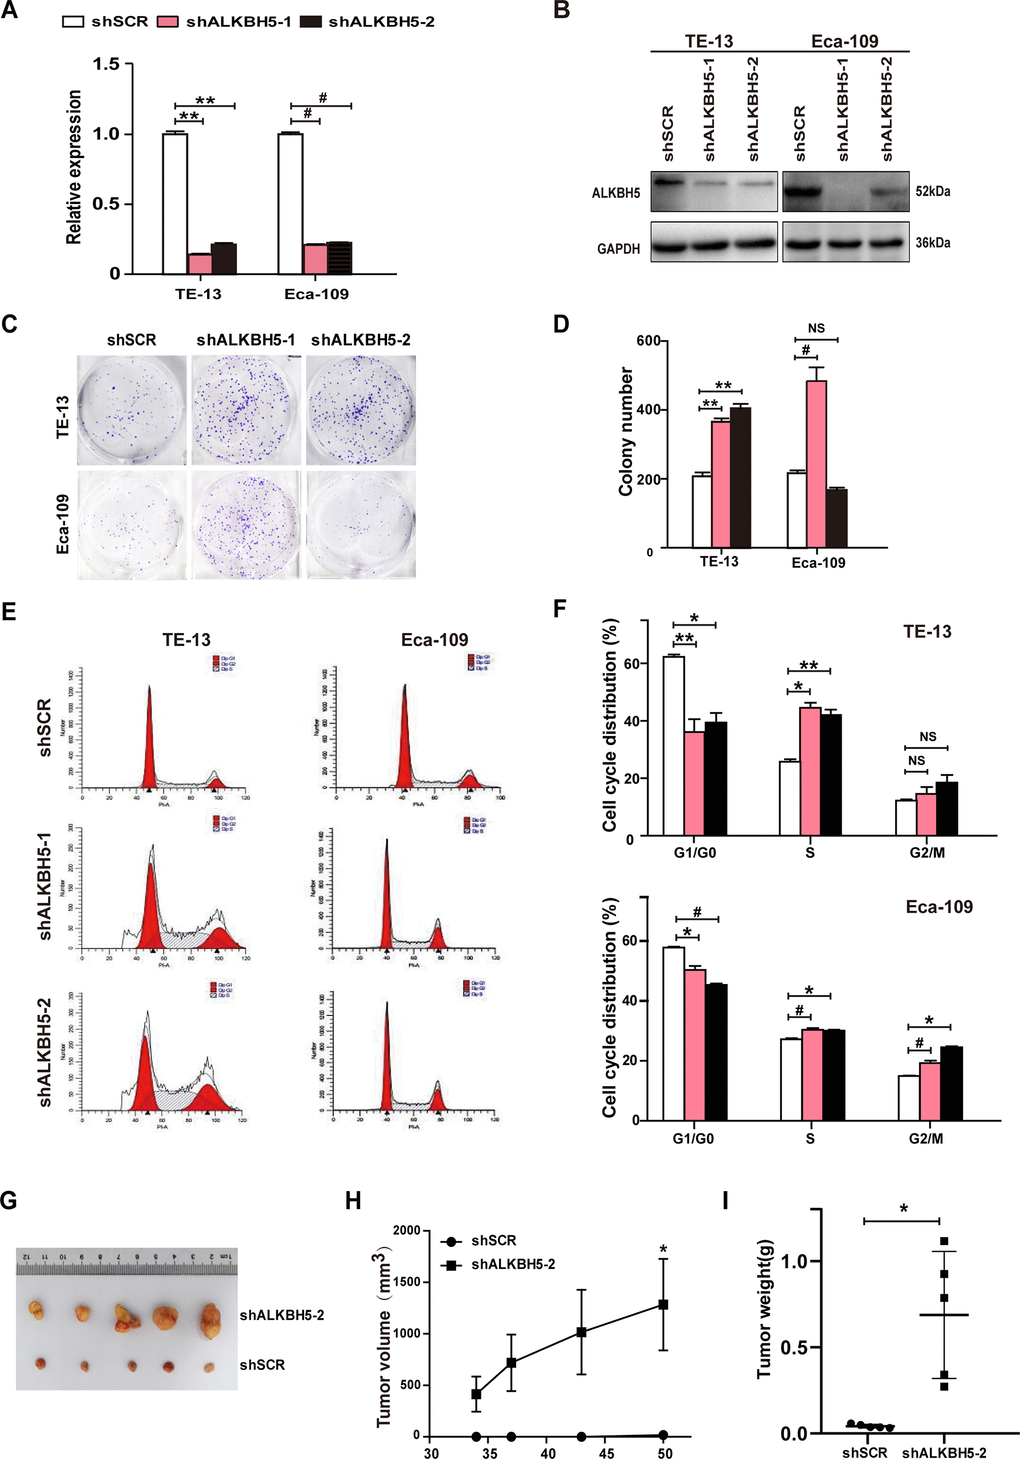 RNAi-induced silencing of endogenous ALKBH5 promoted in vitro proliferation and in vivo tumorigenesis of ESCC cells. (A, B) qRT-PCR (A) and western blot (B) analysis of ALKBH5 expression in shSCR-expressing (LV-shSCR) and shALKBH5-expressing (LV-shALKBH5-1 and LV-shALKBH5-2) ESCC cells (TE-13 and Eca-109 cells). (C, D) A colony formation assay was performed to study the proliferation ability of shSCR- and shALKBH5-expressing ESCC cells. Left panels show representative images of colony formation assay (C) and right panels signify the total colony count (D). (E, F) Effects of RNAi-induced ALKBH5 silencing on cell cycle distribution in TE-13 and Eca-109 cells. (G–I) ALKBH5 knockdown enhanced tumor growth of TE-13 cells in nude mice. shSCR- or shALKBH5-expressing TE-13 cells were subcutaneously injected into the left and right dorsal thighs of mice, respectively. (G) Representative image of tumors formed. (H) Growth curve of tumor volumes. (I) Tumors were weighed.